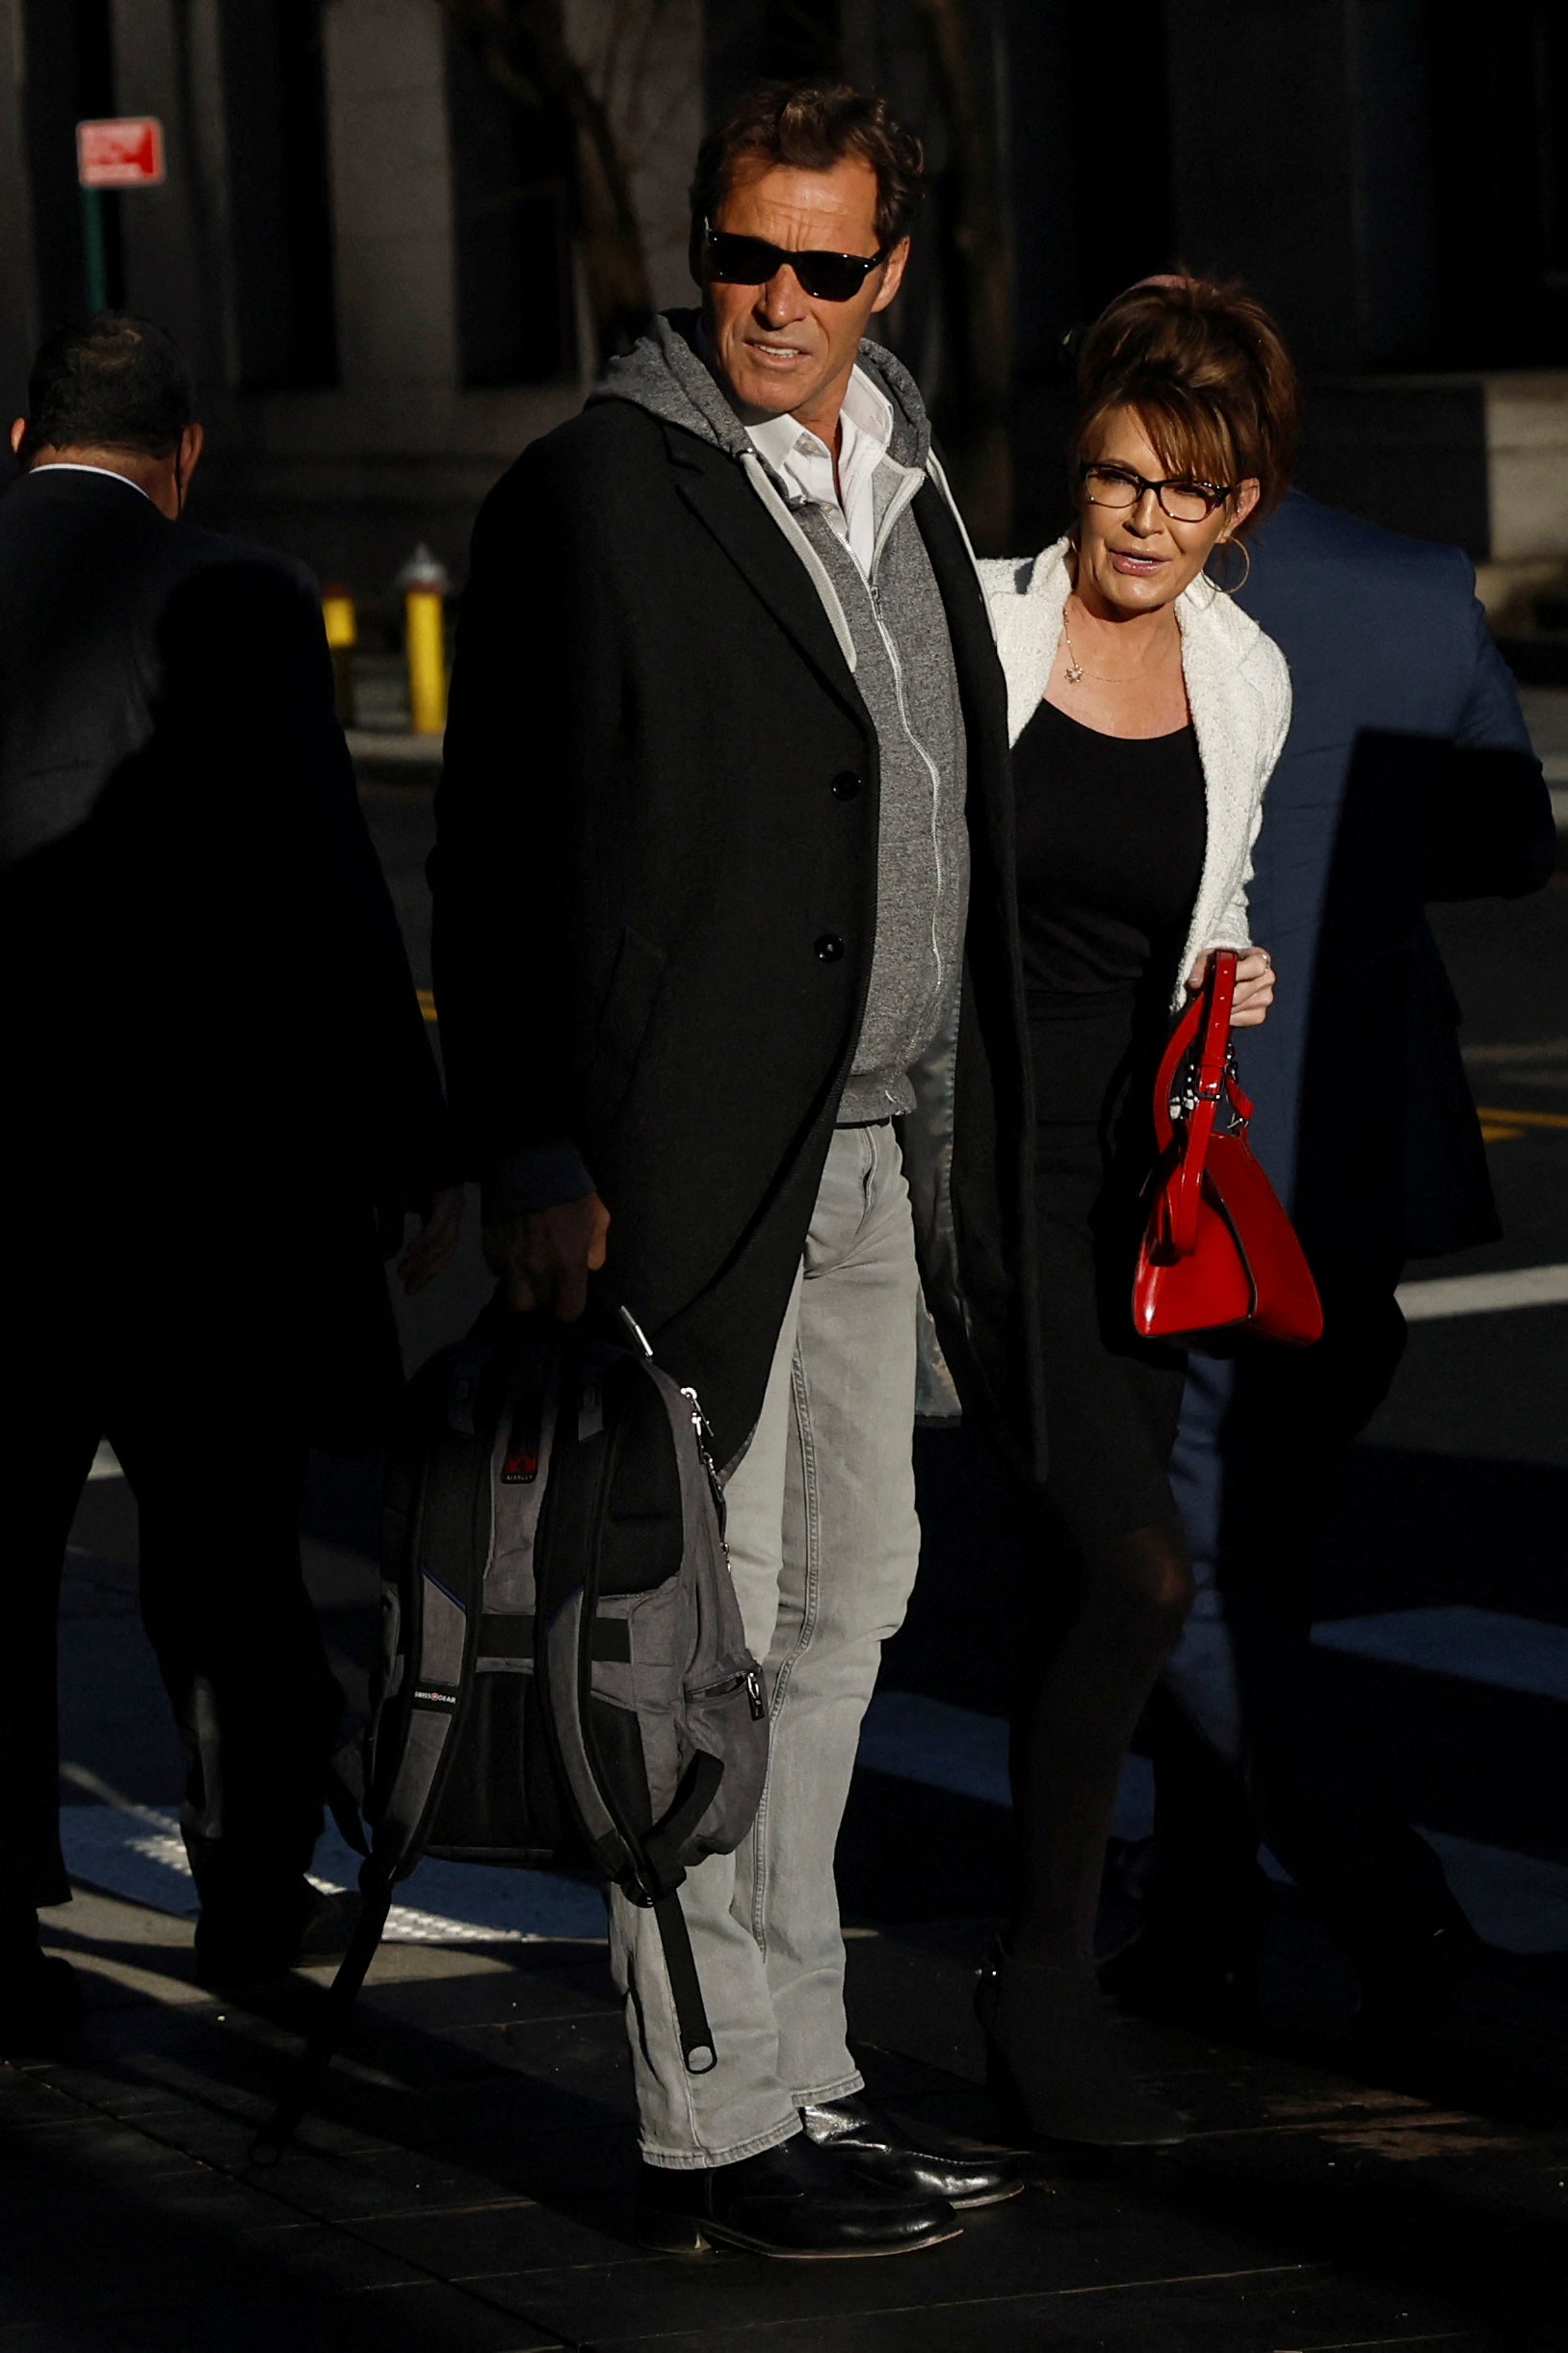 Sarah Palin arrives with former NHL hockey player Ron Duguay during her defamation lawsuit against the New York Times, at the United States Courthouse in Manhattan on 10 February 2022